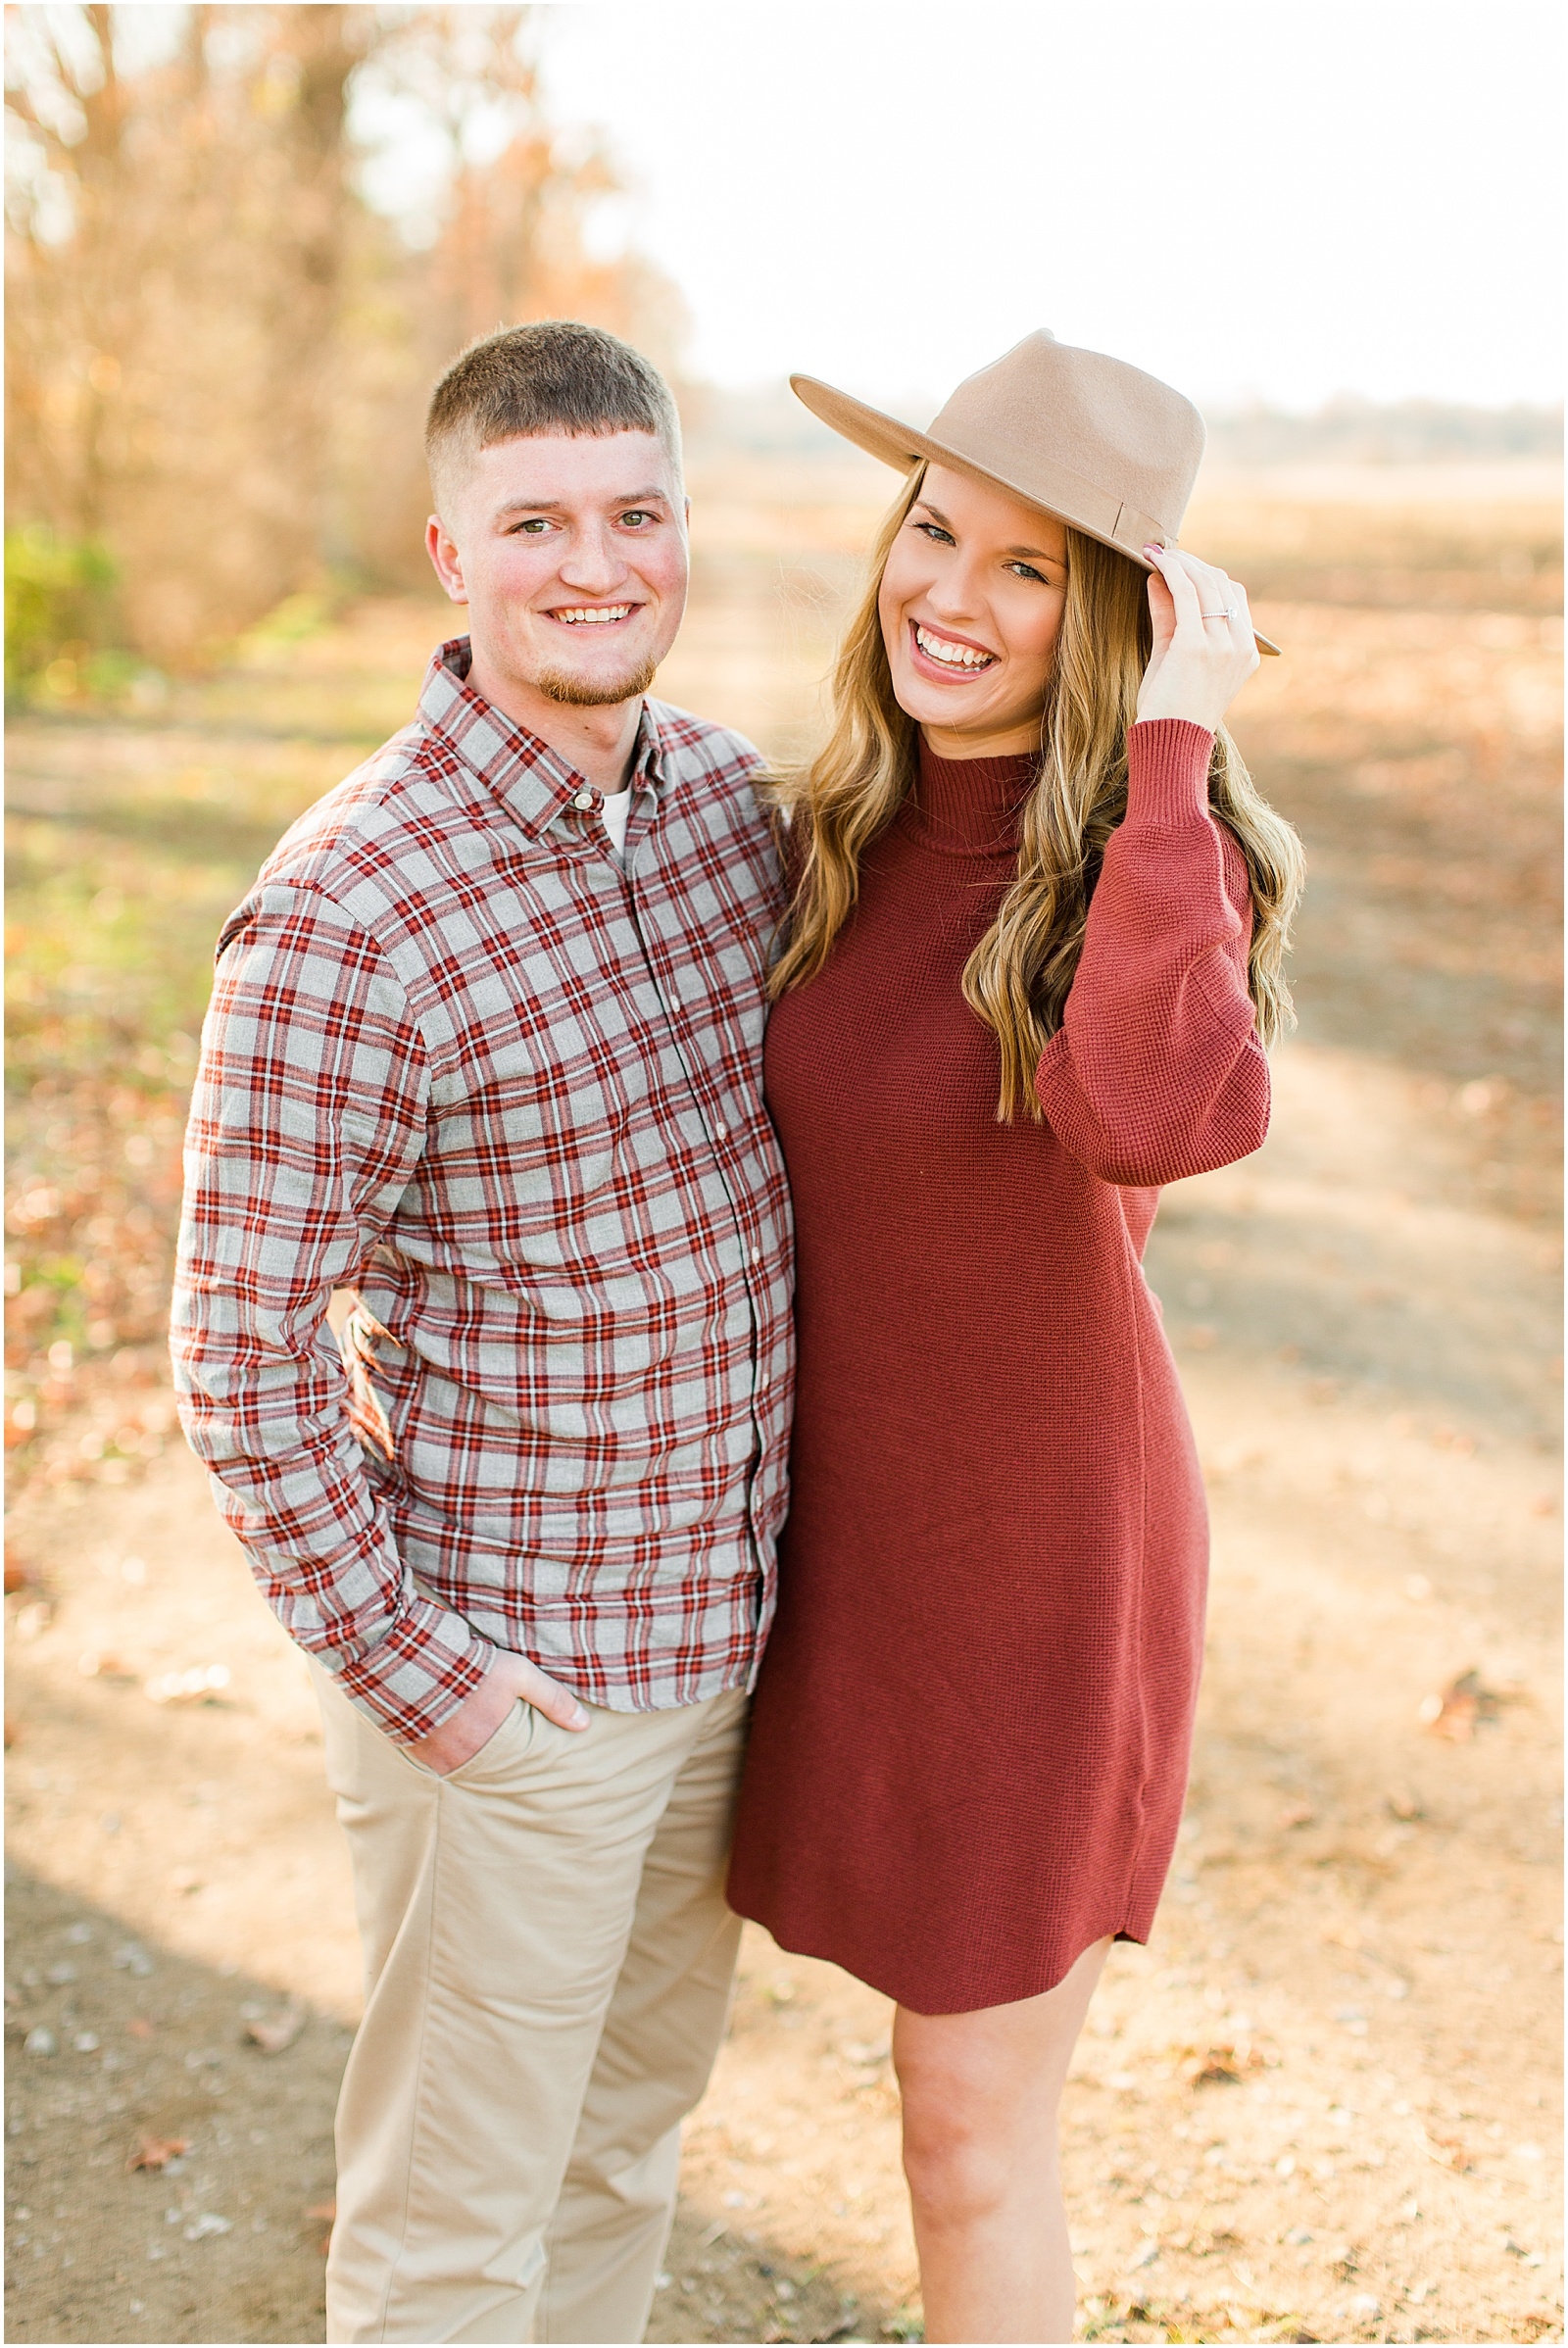 A Fall Southern Indiana Engagement Seesion | Cody and Hannah | Bret and Brandie Photography 008.jpg